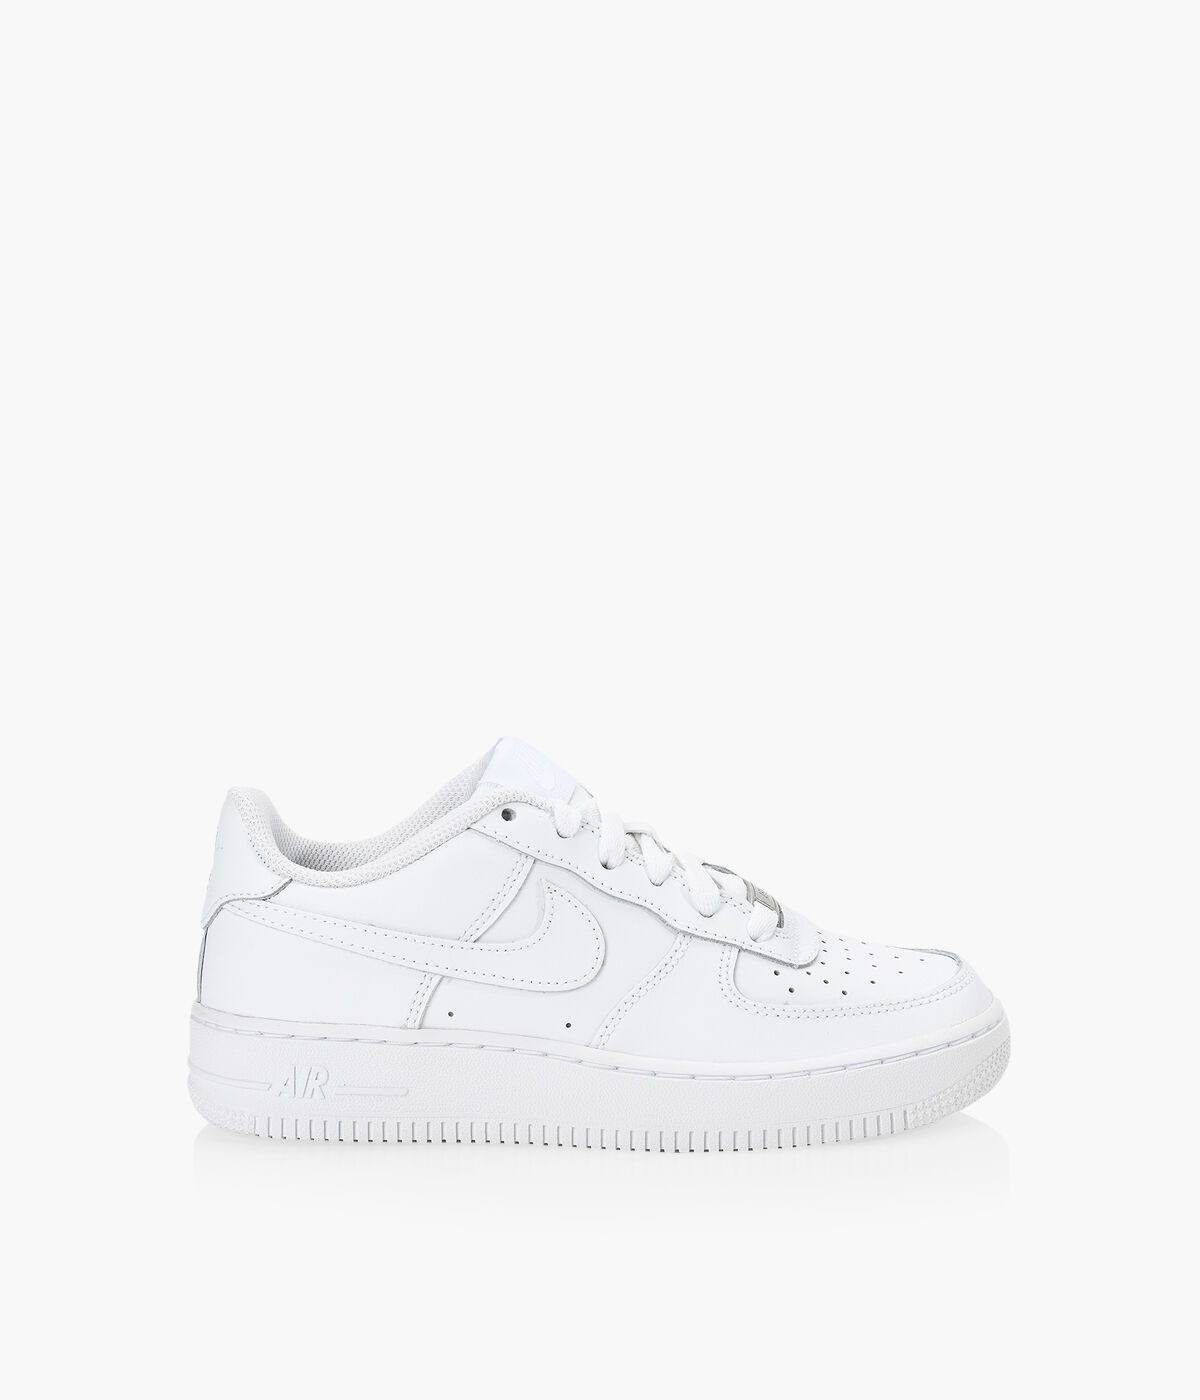 womens white air force 1 size 8.5